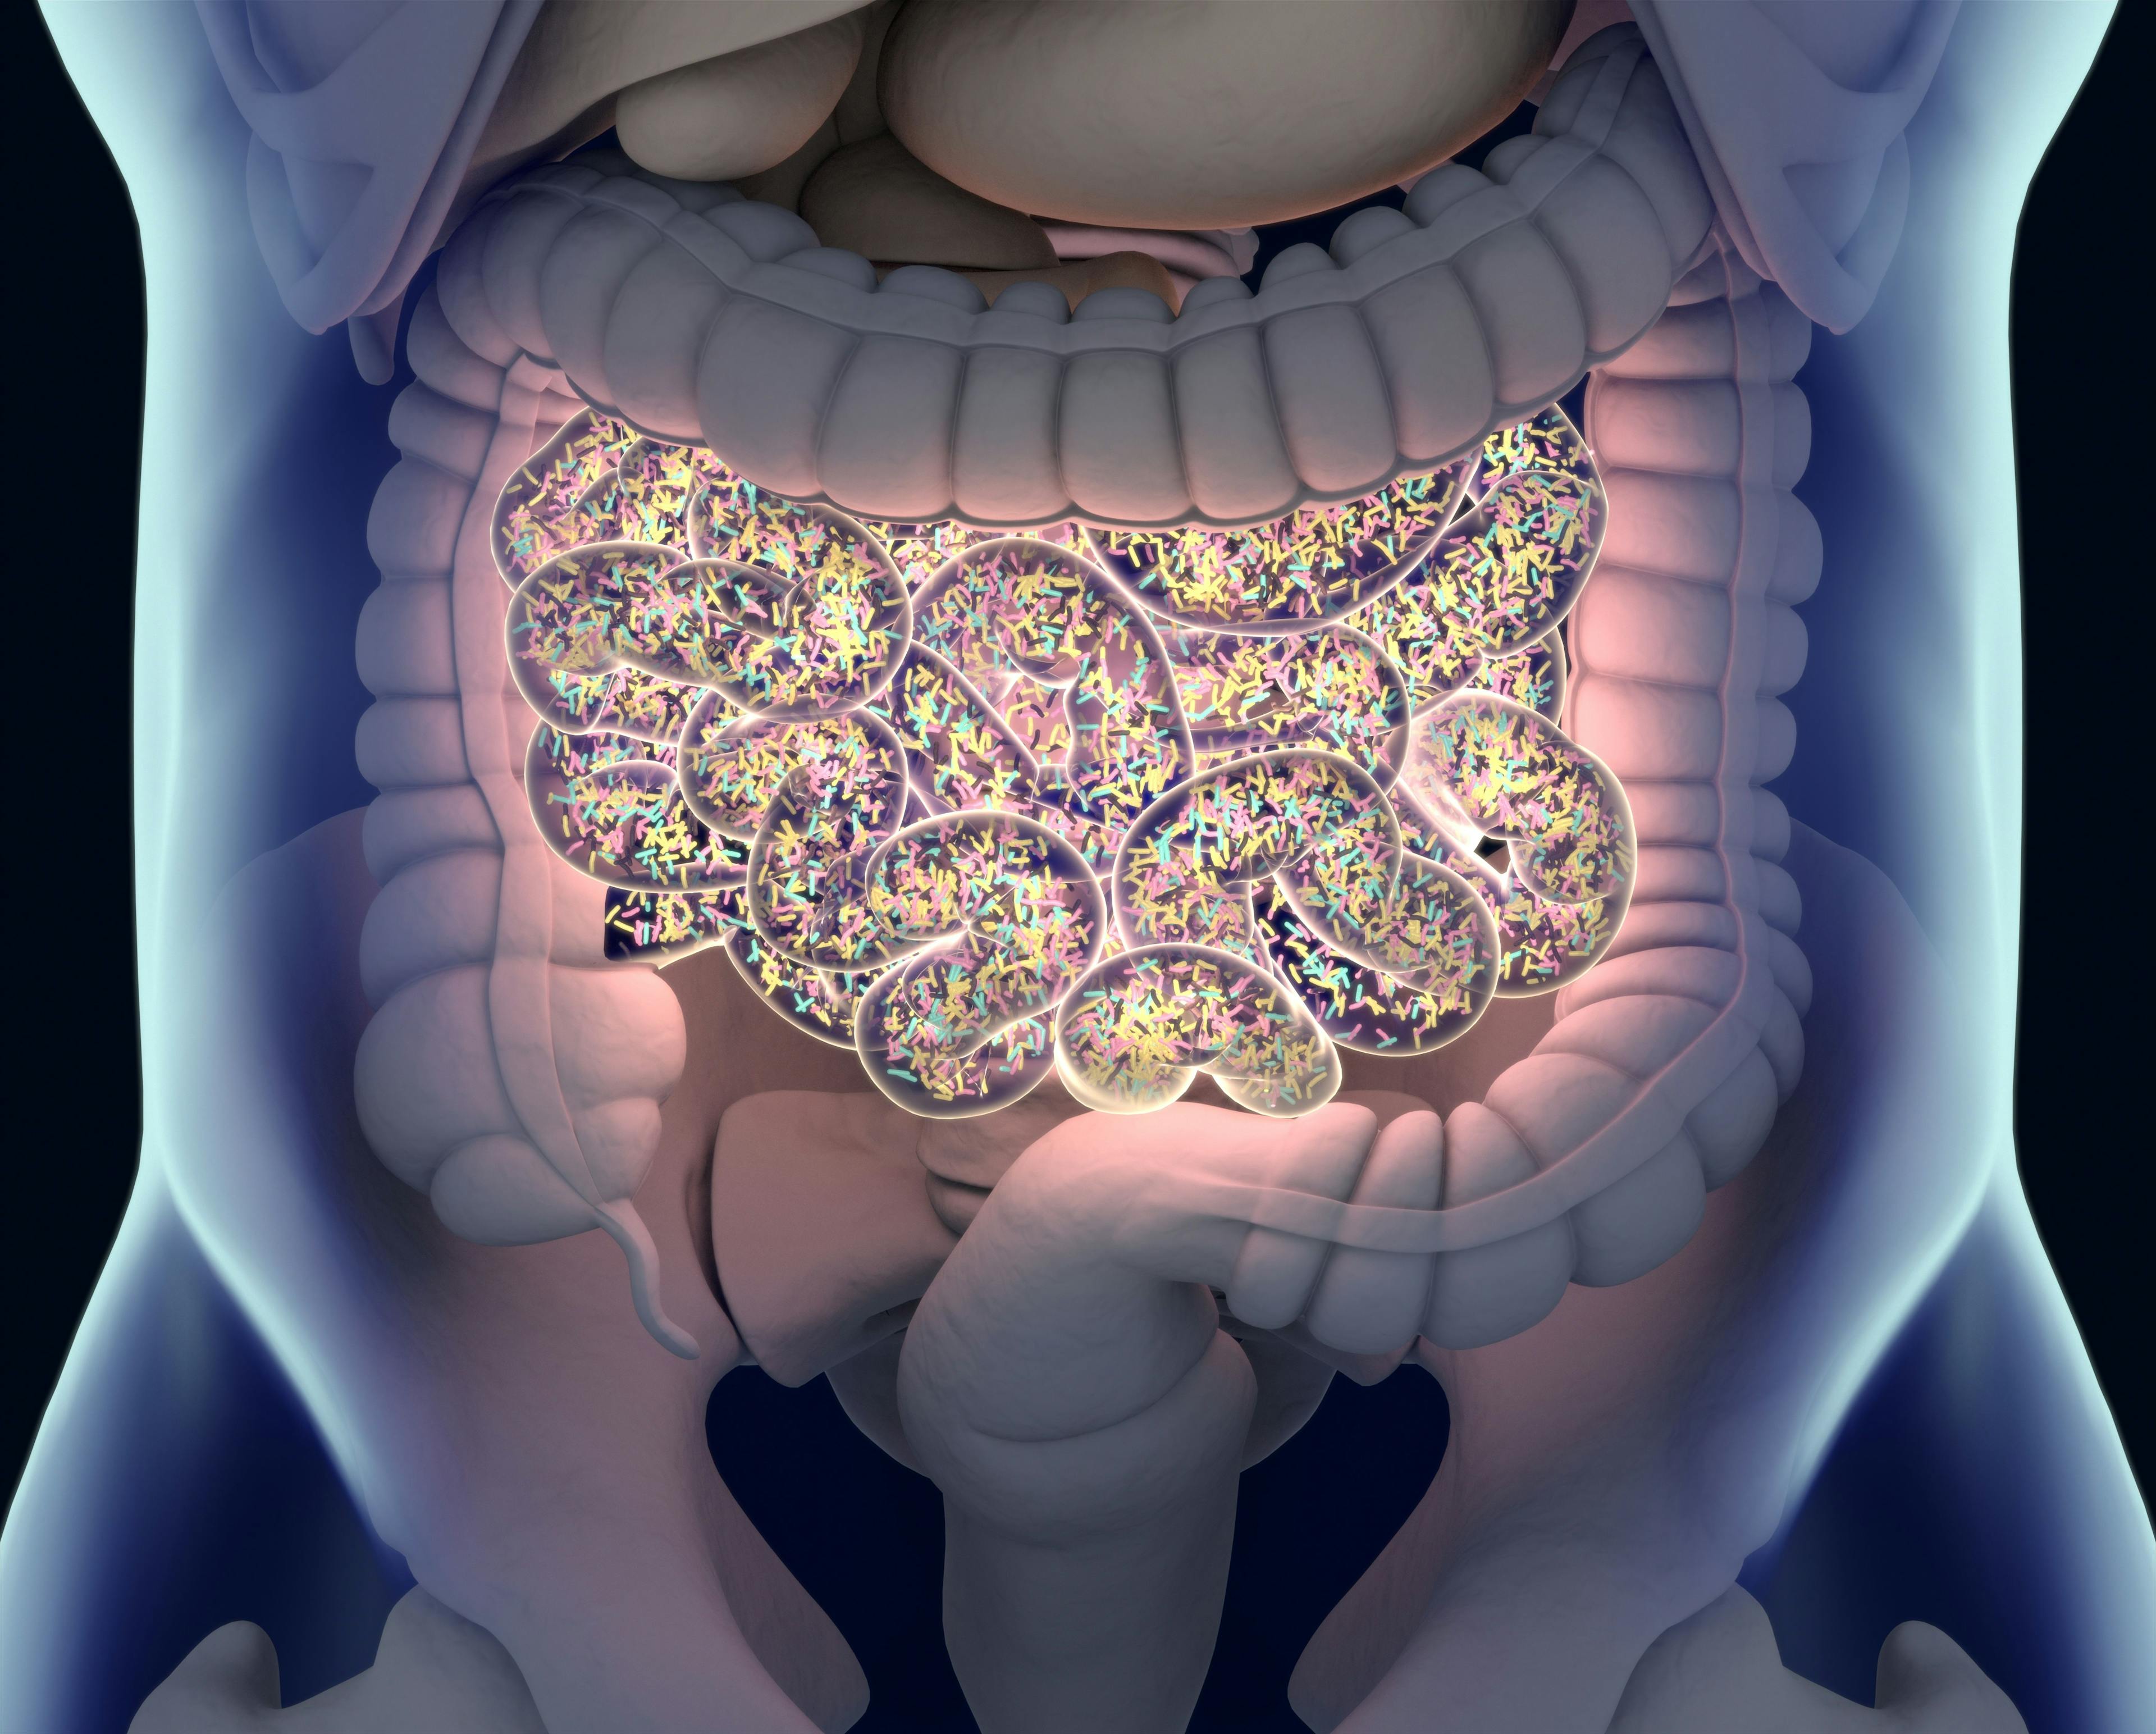 The phase 2 CAVE trial indicated that a combination of cetuximab and avelumab is a promising rechallenge treatment for patients with RAS wild-type metastatic colorectal cancer.